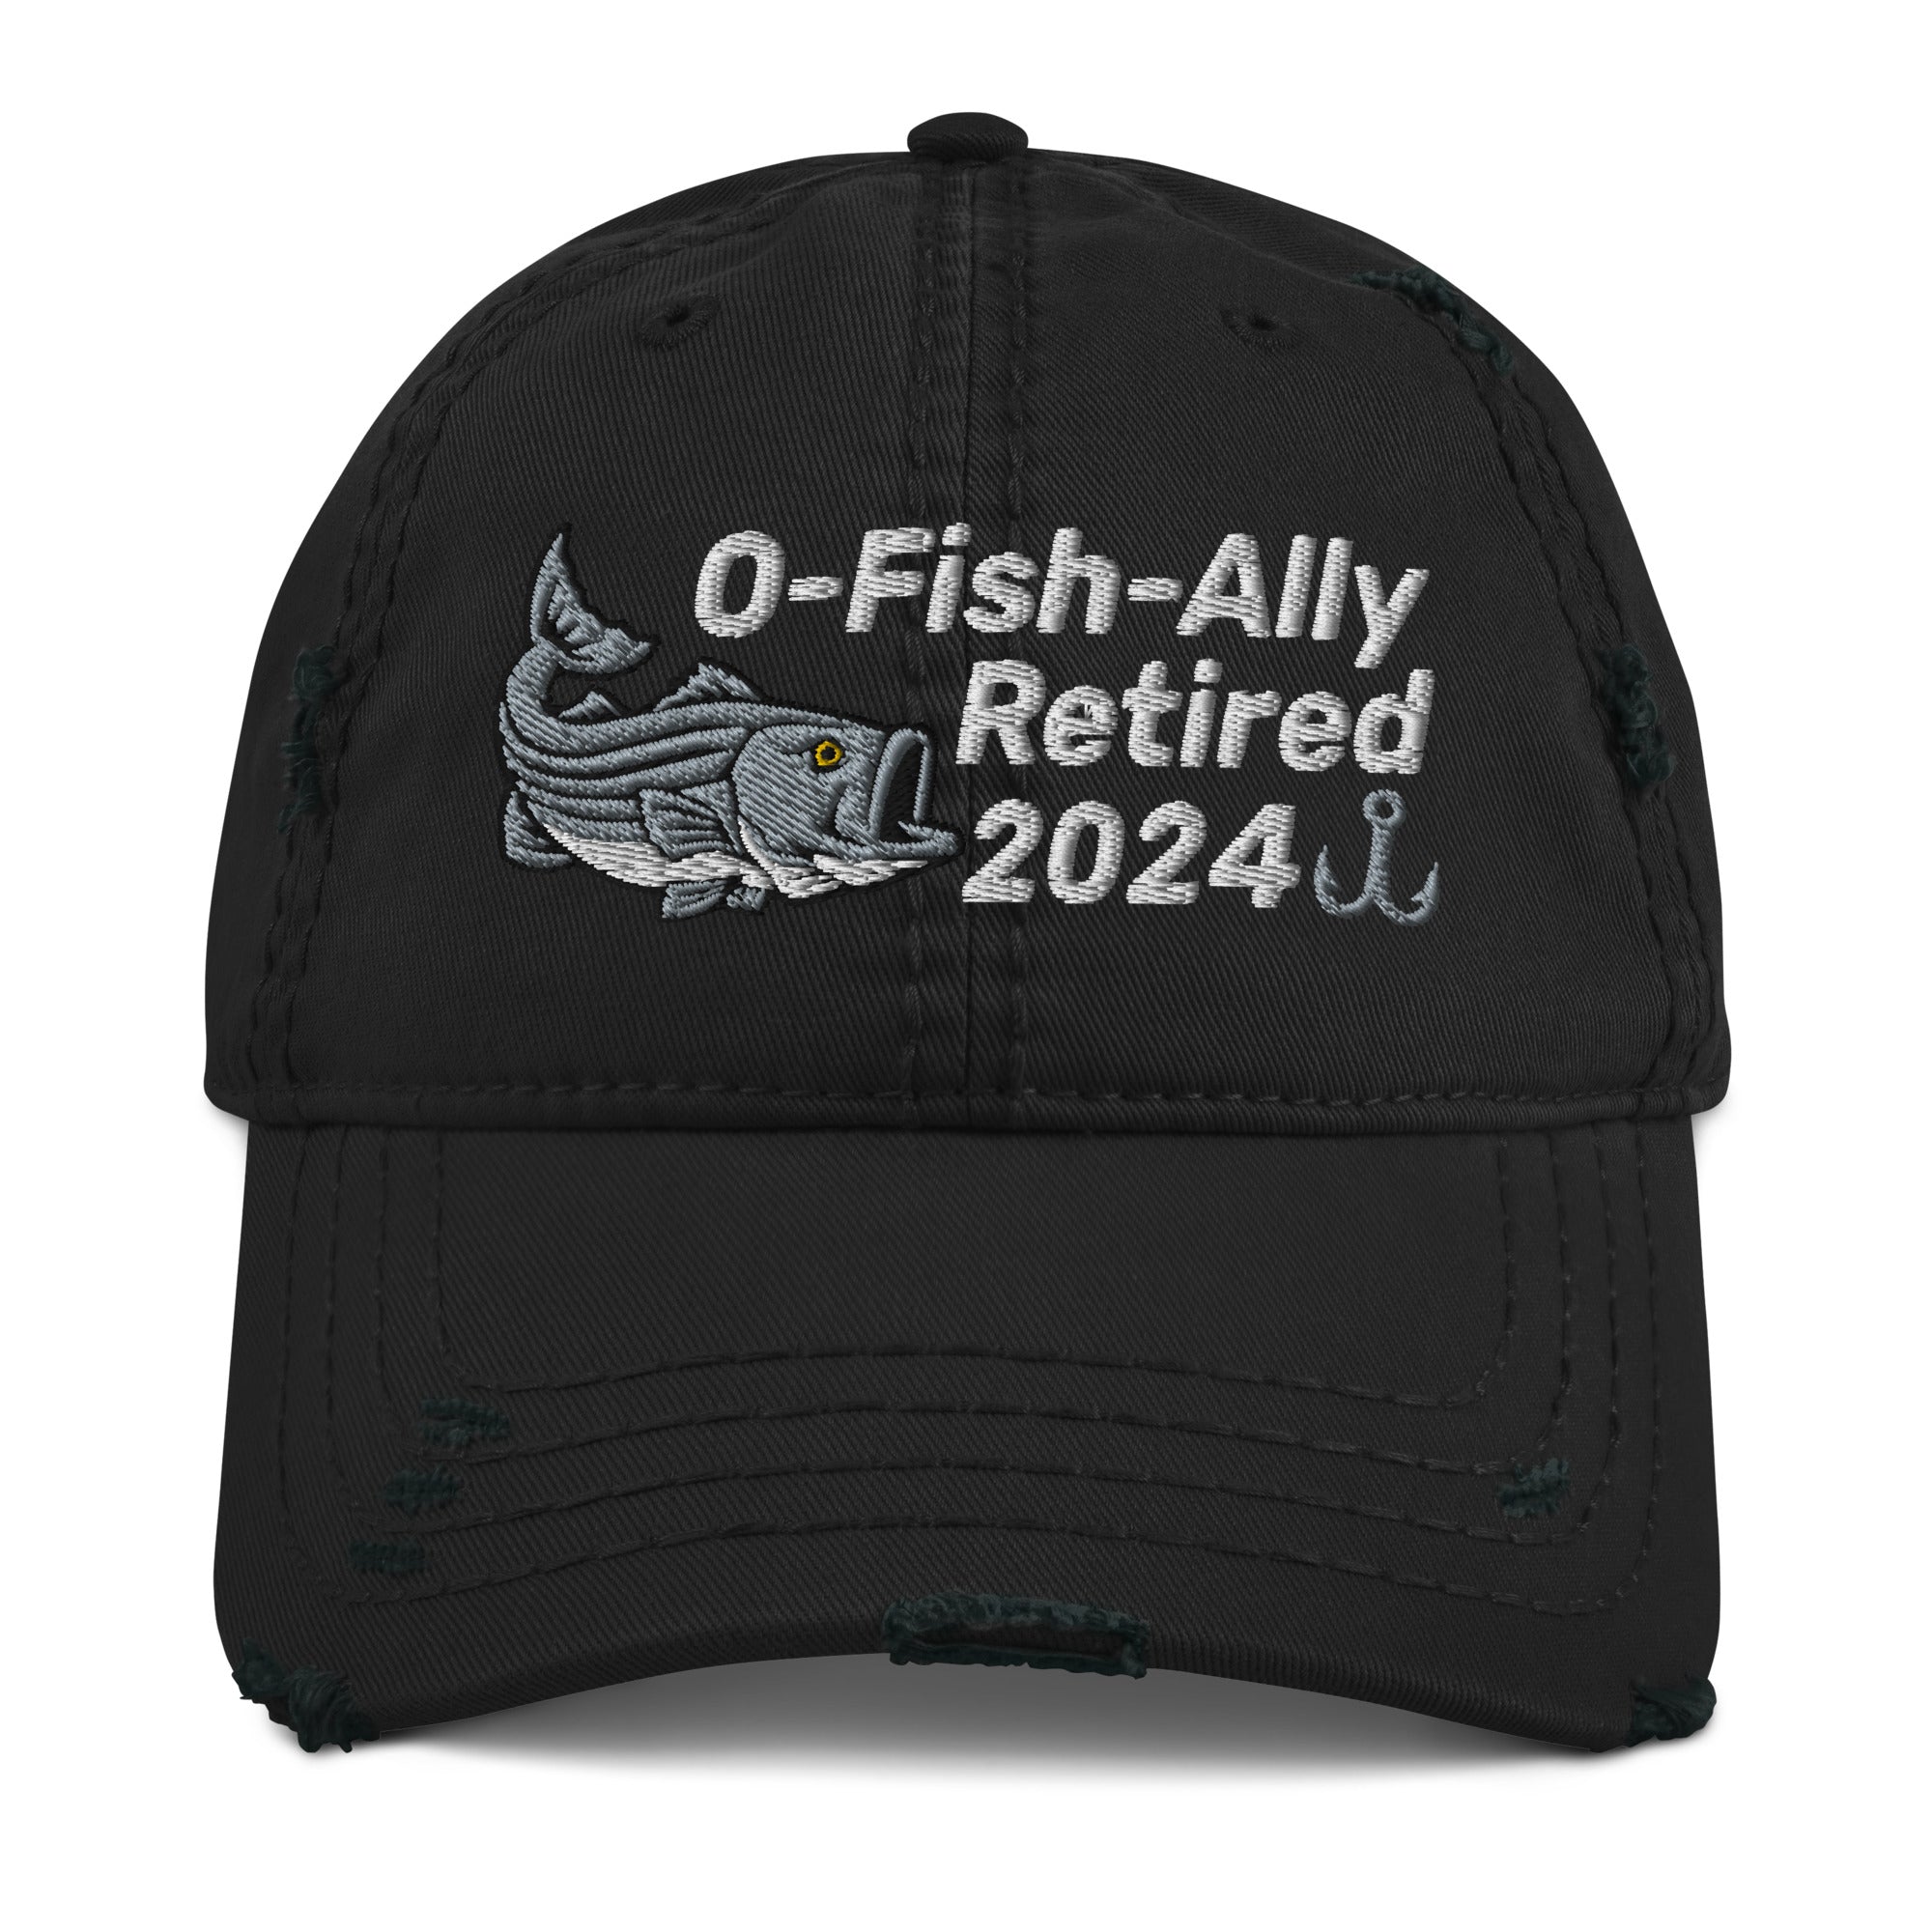 O-Fish-Ally Retired Hat